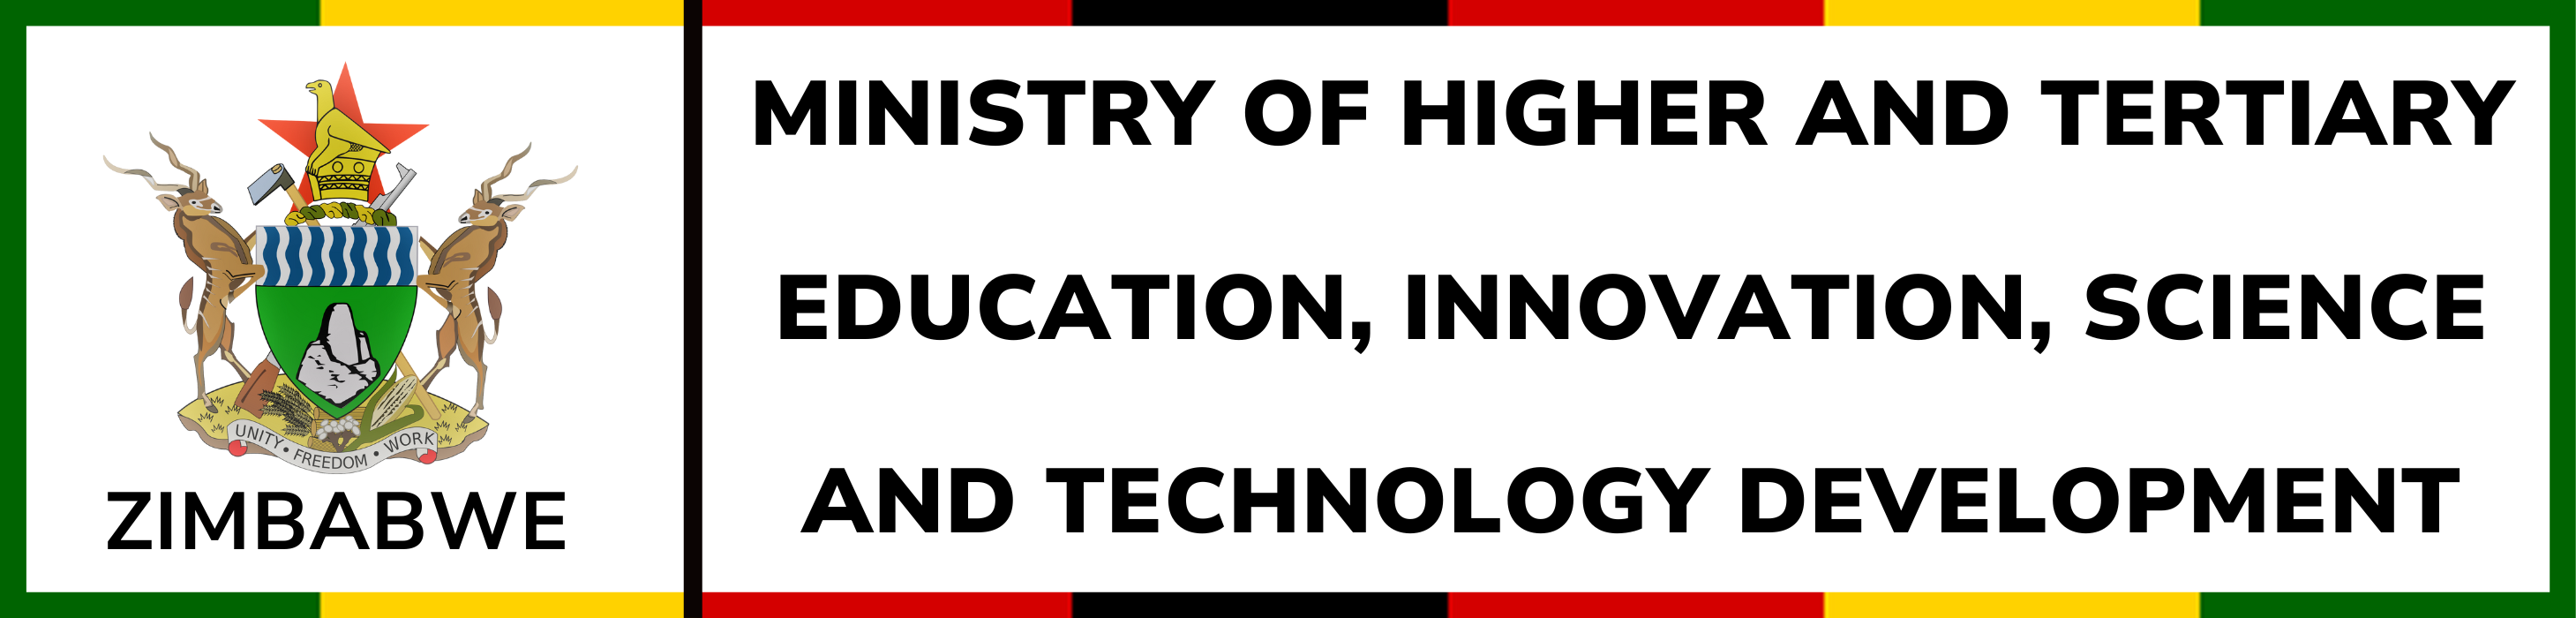 Ministry of Higher and Tertiary Education, Science and Technology Development